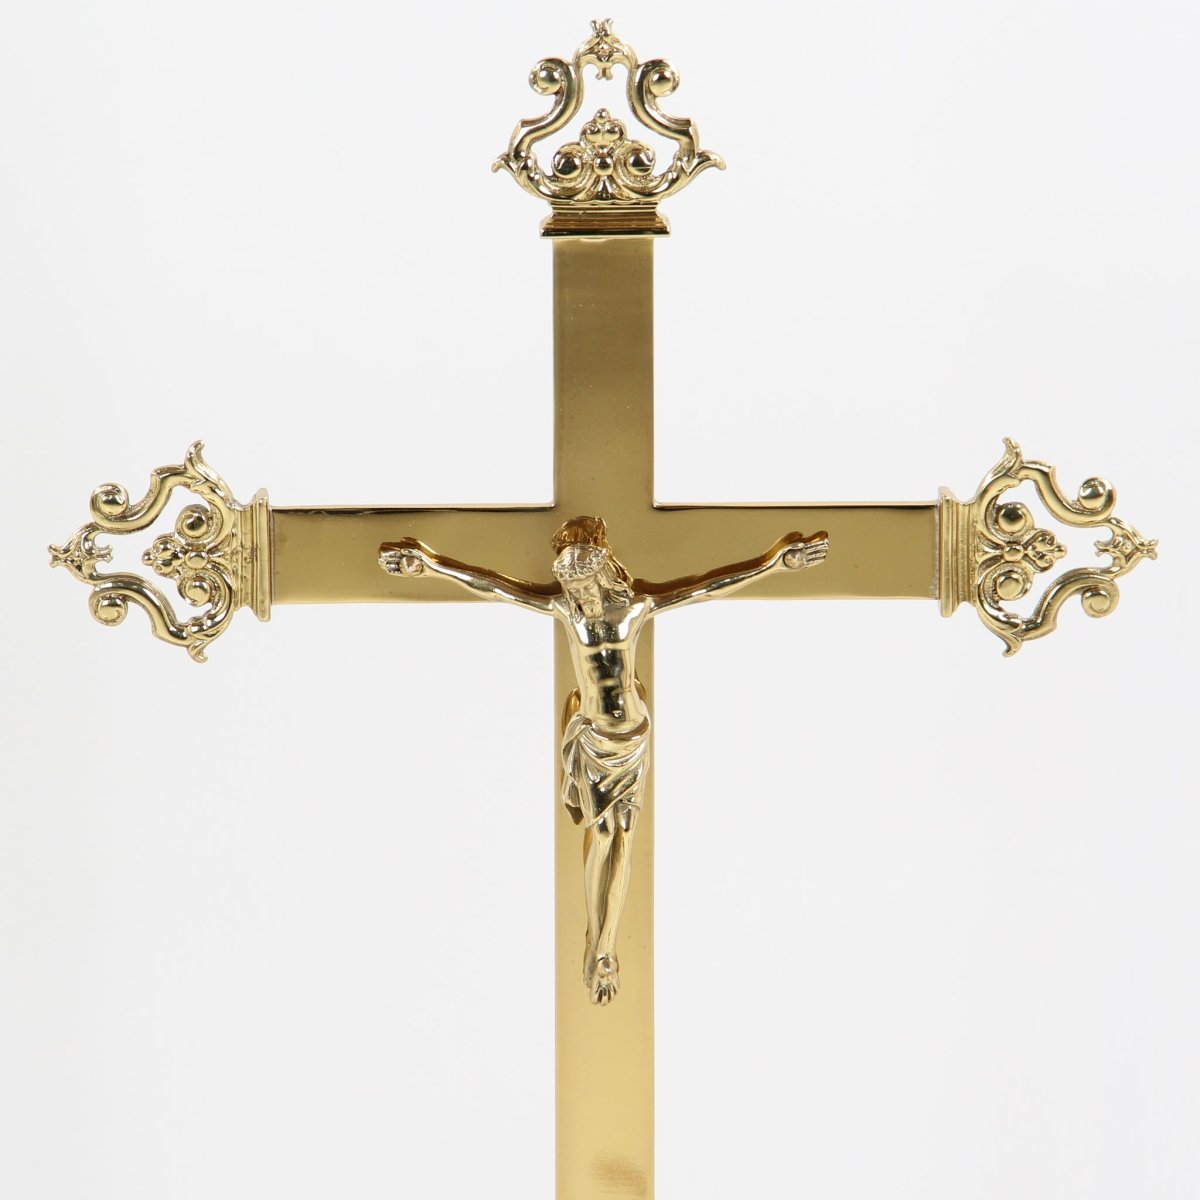 Altar Crucifix with Candle Holders, Manufacturers of Altar Crucifix with Candle  Holders, Buy Altar Crucifix with Candle Holders at   - as-1003